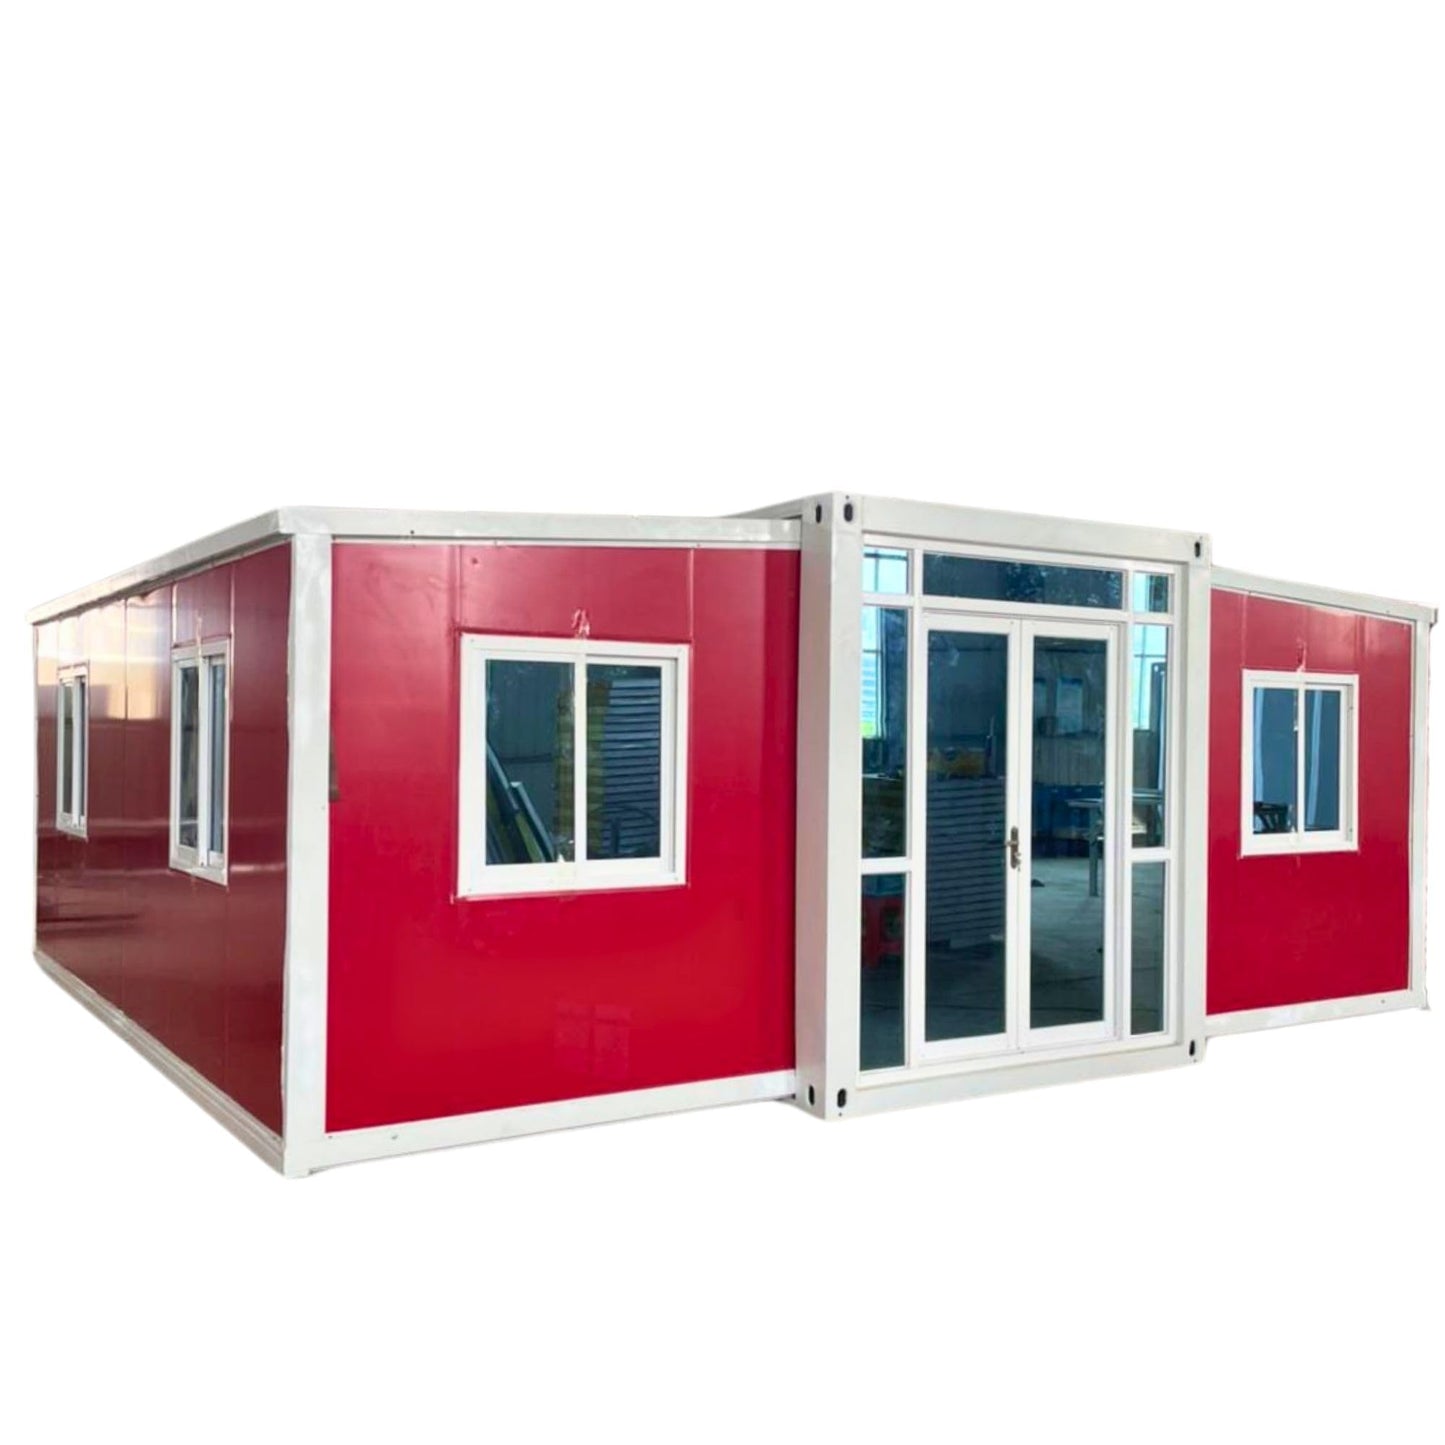 Portable Prefabricated House to Live in Tiny Home Mobile Expandable Prefab Foldable House for Hotel, Rent, S Guard, Hunting & Various Uses (30ft) (Red)